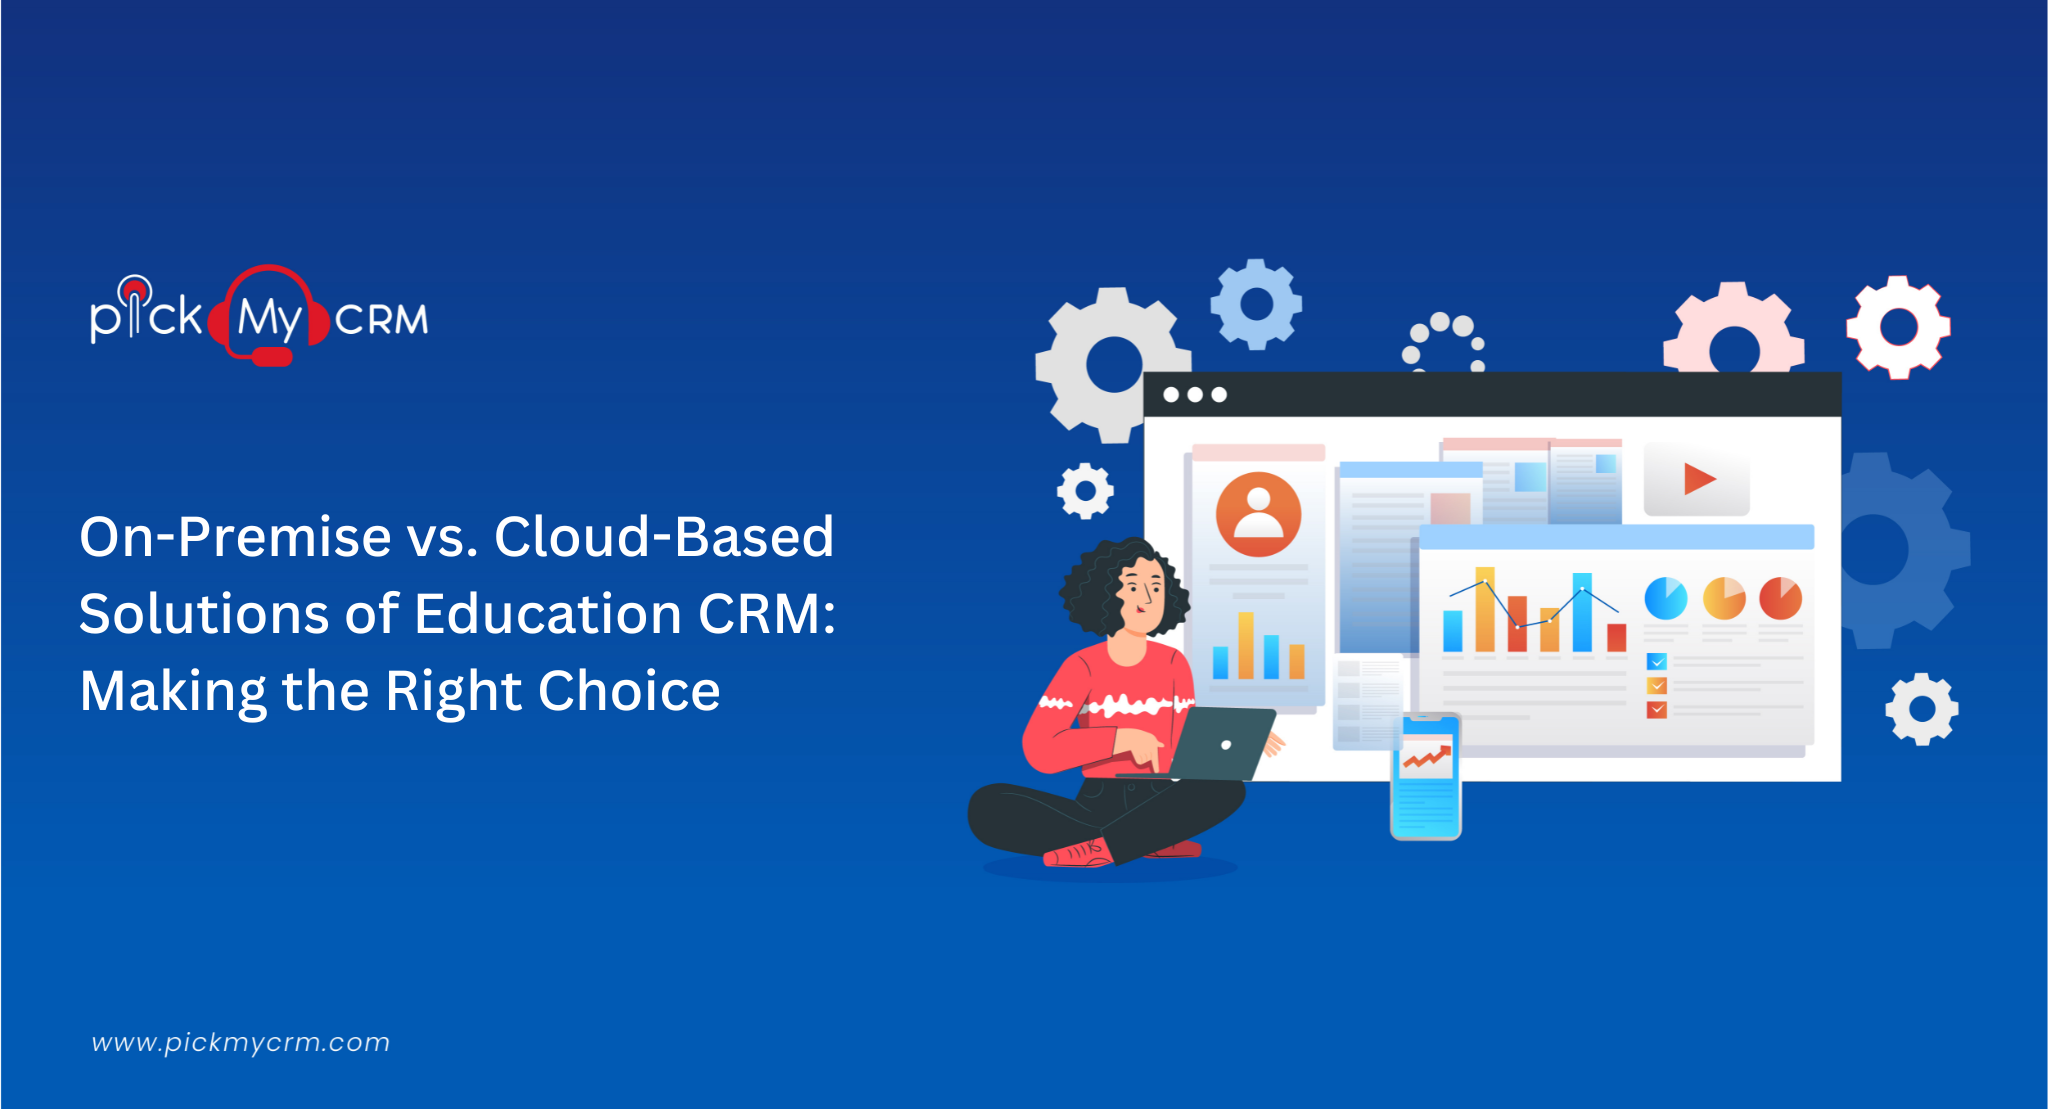 On-Premise vs. Cloud-Based Solutions of Education CRM: Making the Right Choice